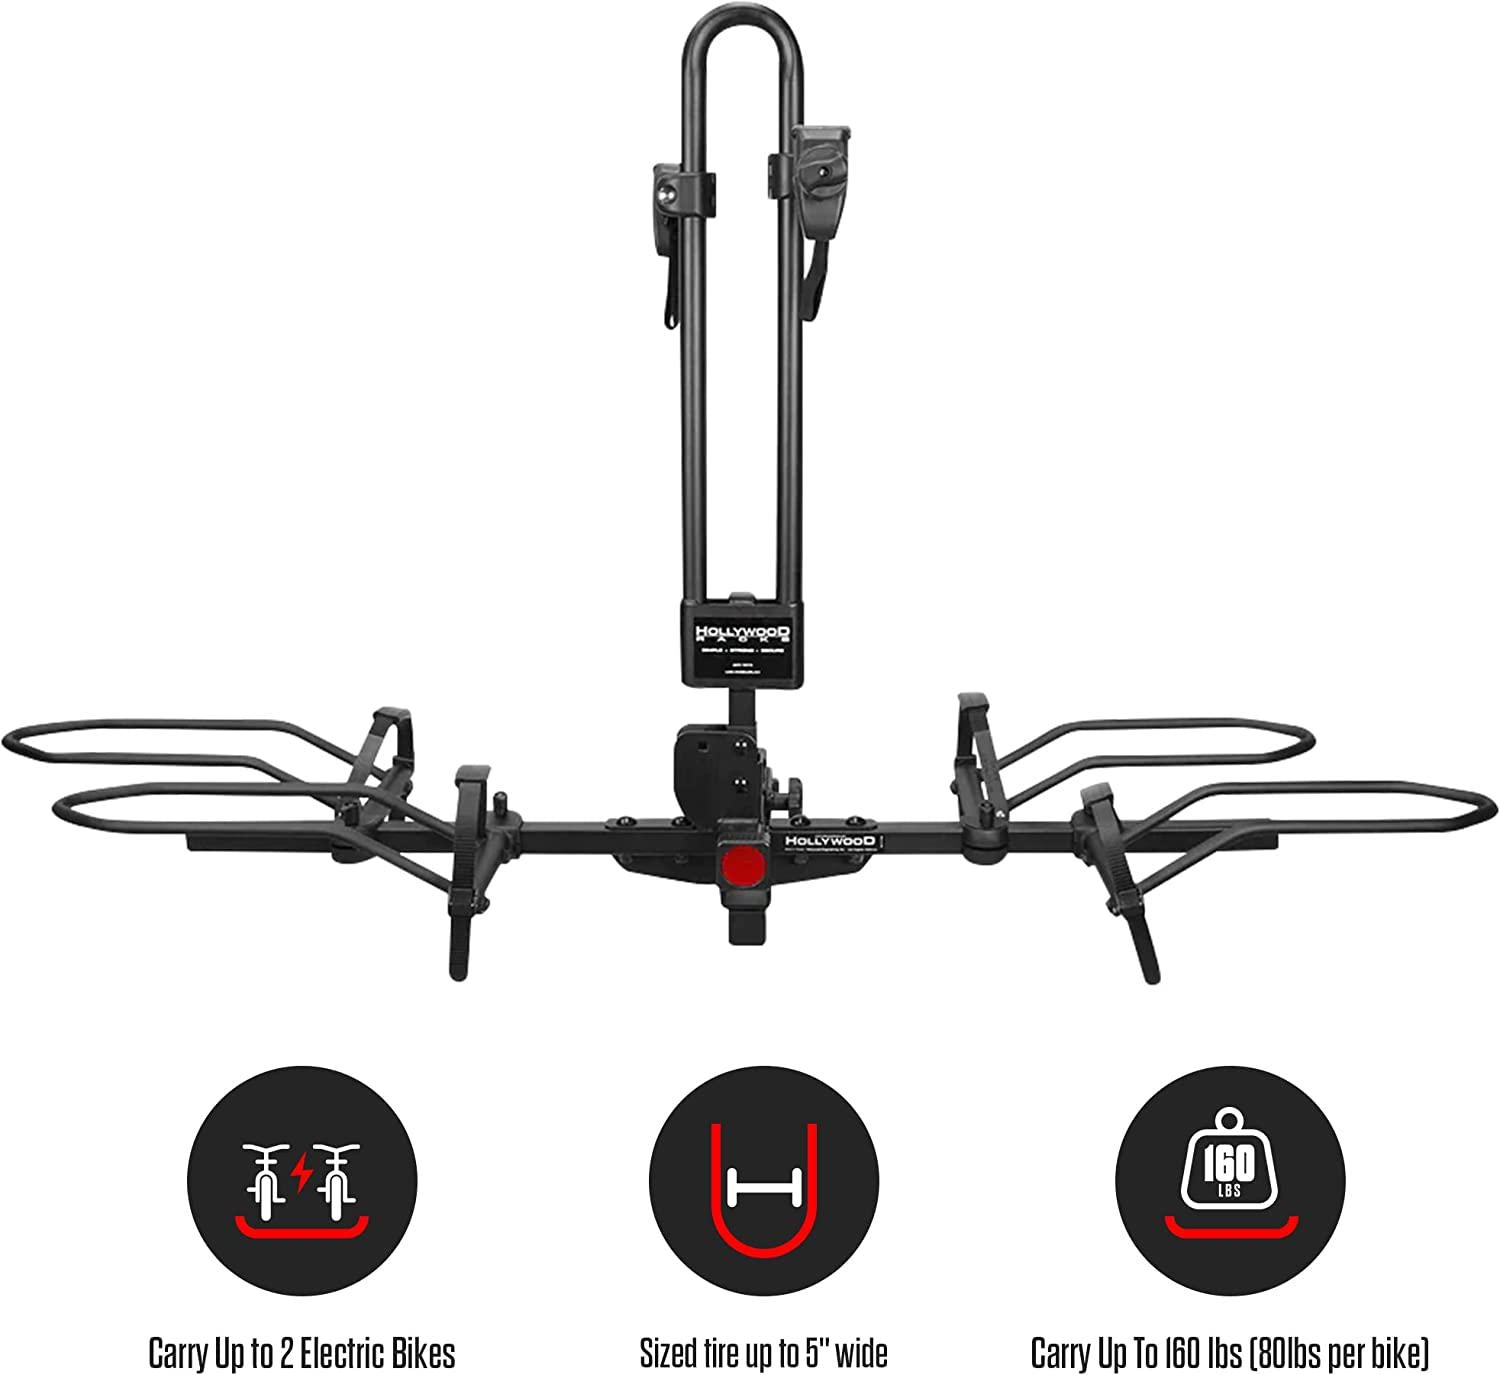 RV Rider Hitch Bike Rack for 2 E-Bikes up to 80 lbs Each - Premium Electric Bike Rack for RV, Fifth Wheel, Flat Towed Vehicle - Durable EBike Rack for Standard and Fat Tire Bikes-